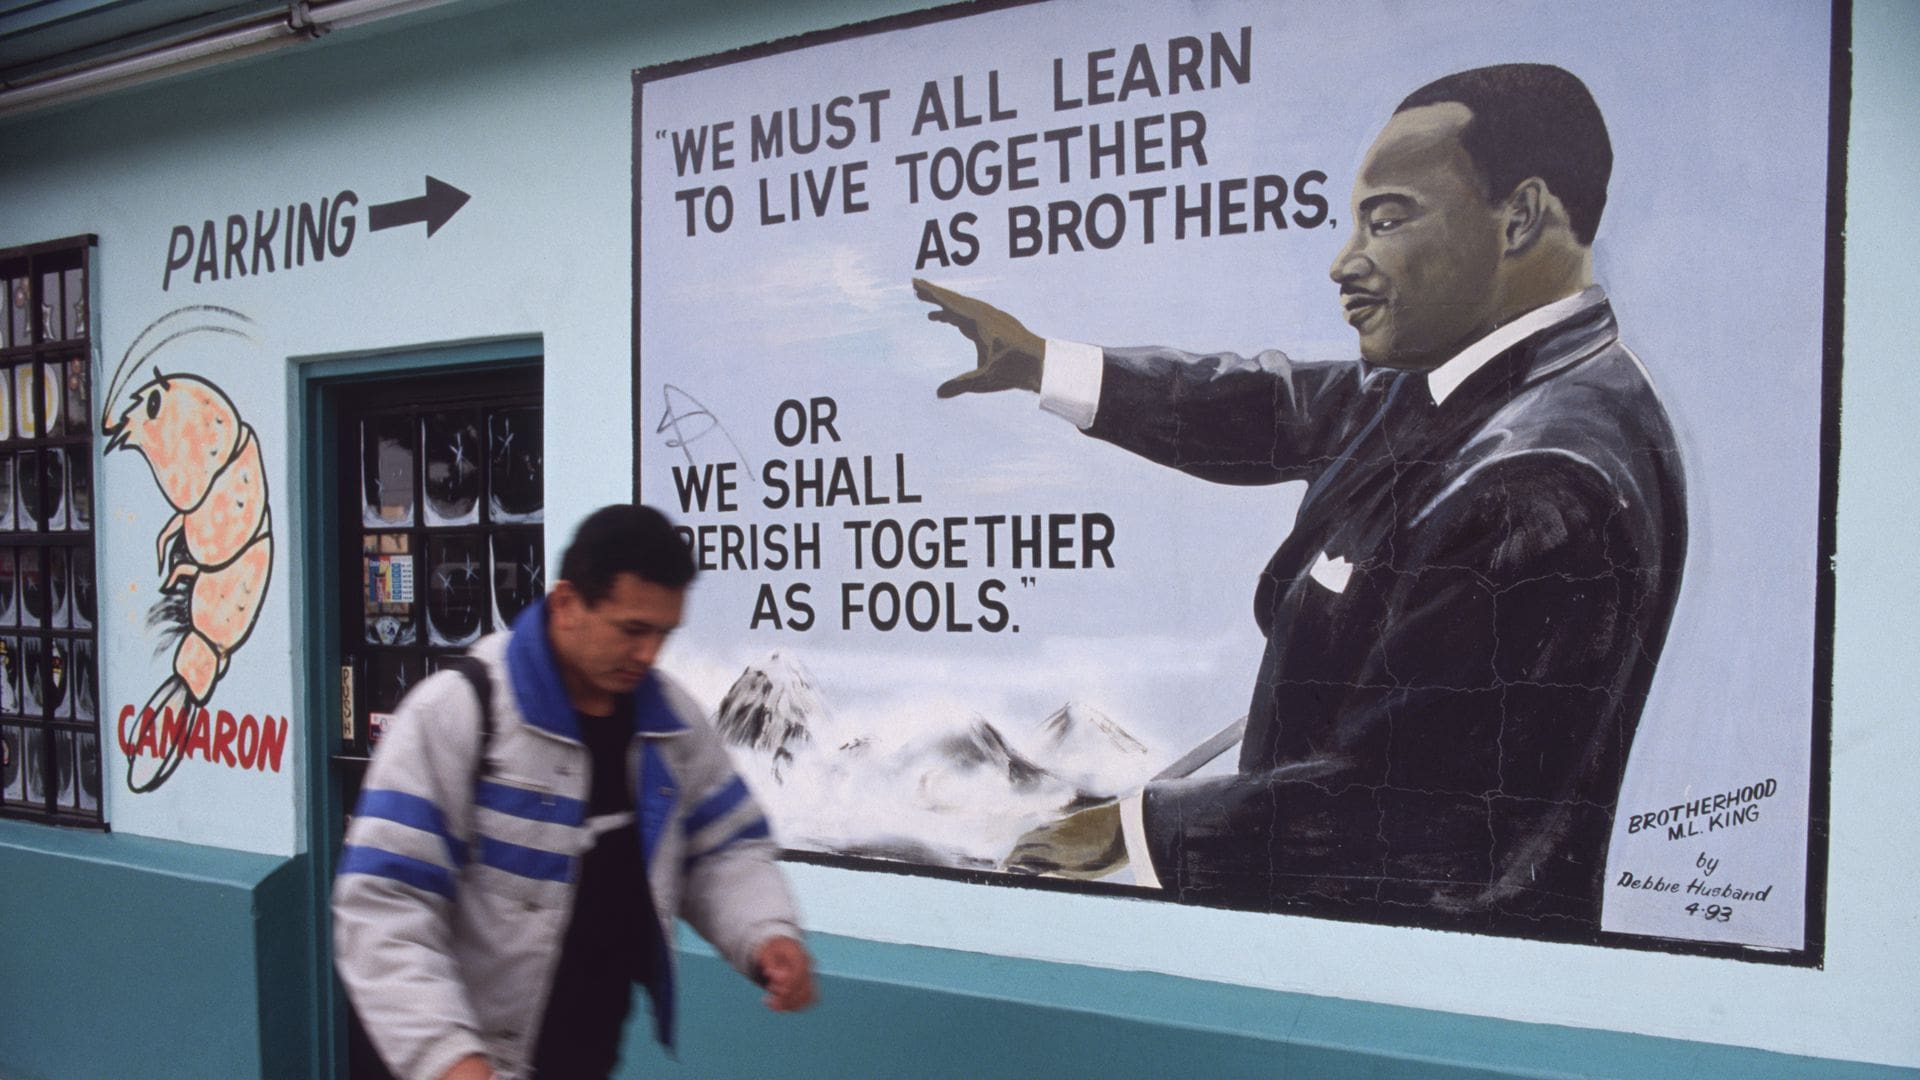 In photos: How Martin Luther King Jr. inspired Latinos